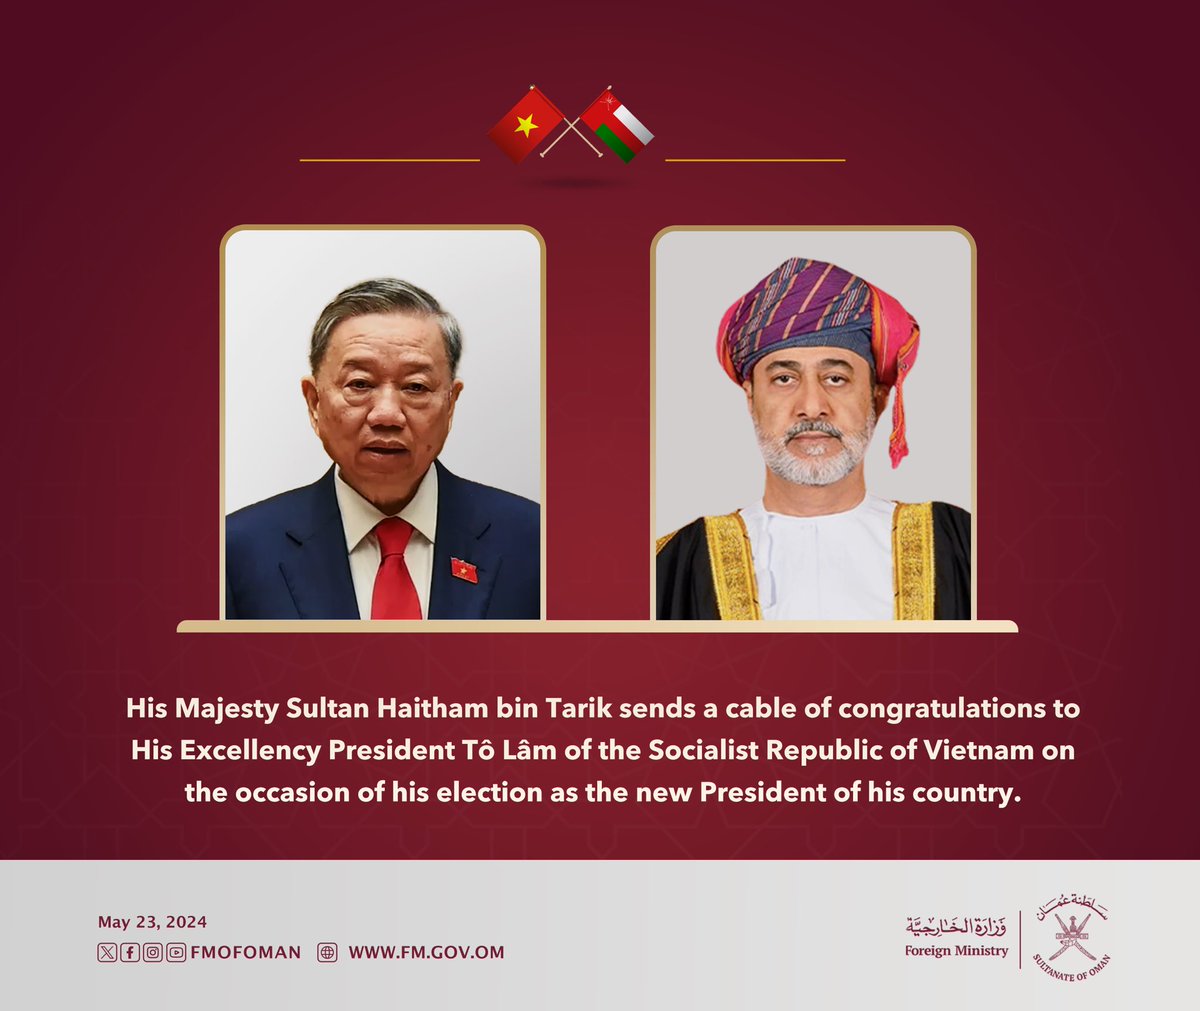 His Majesty the Sultan sends a cable of congratulations to His Excellency President Tô Lâm of the Socialist Republic of #Vietnam on the occasion of his election as the new President of his country.